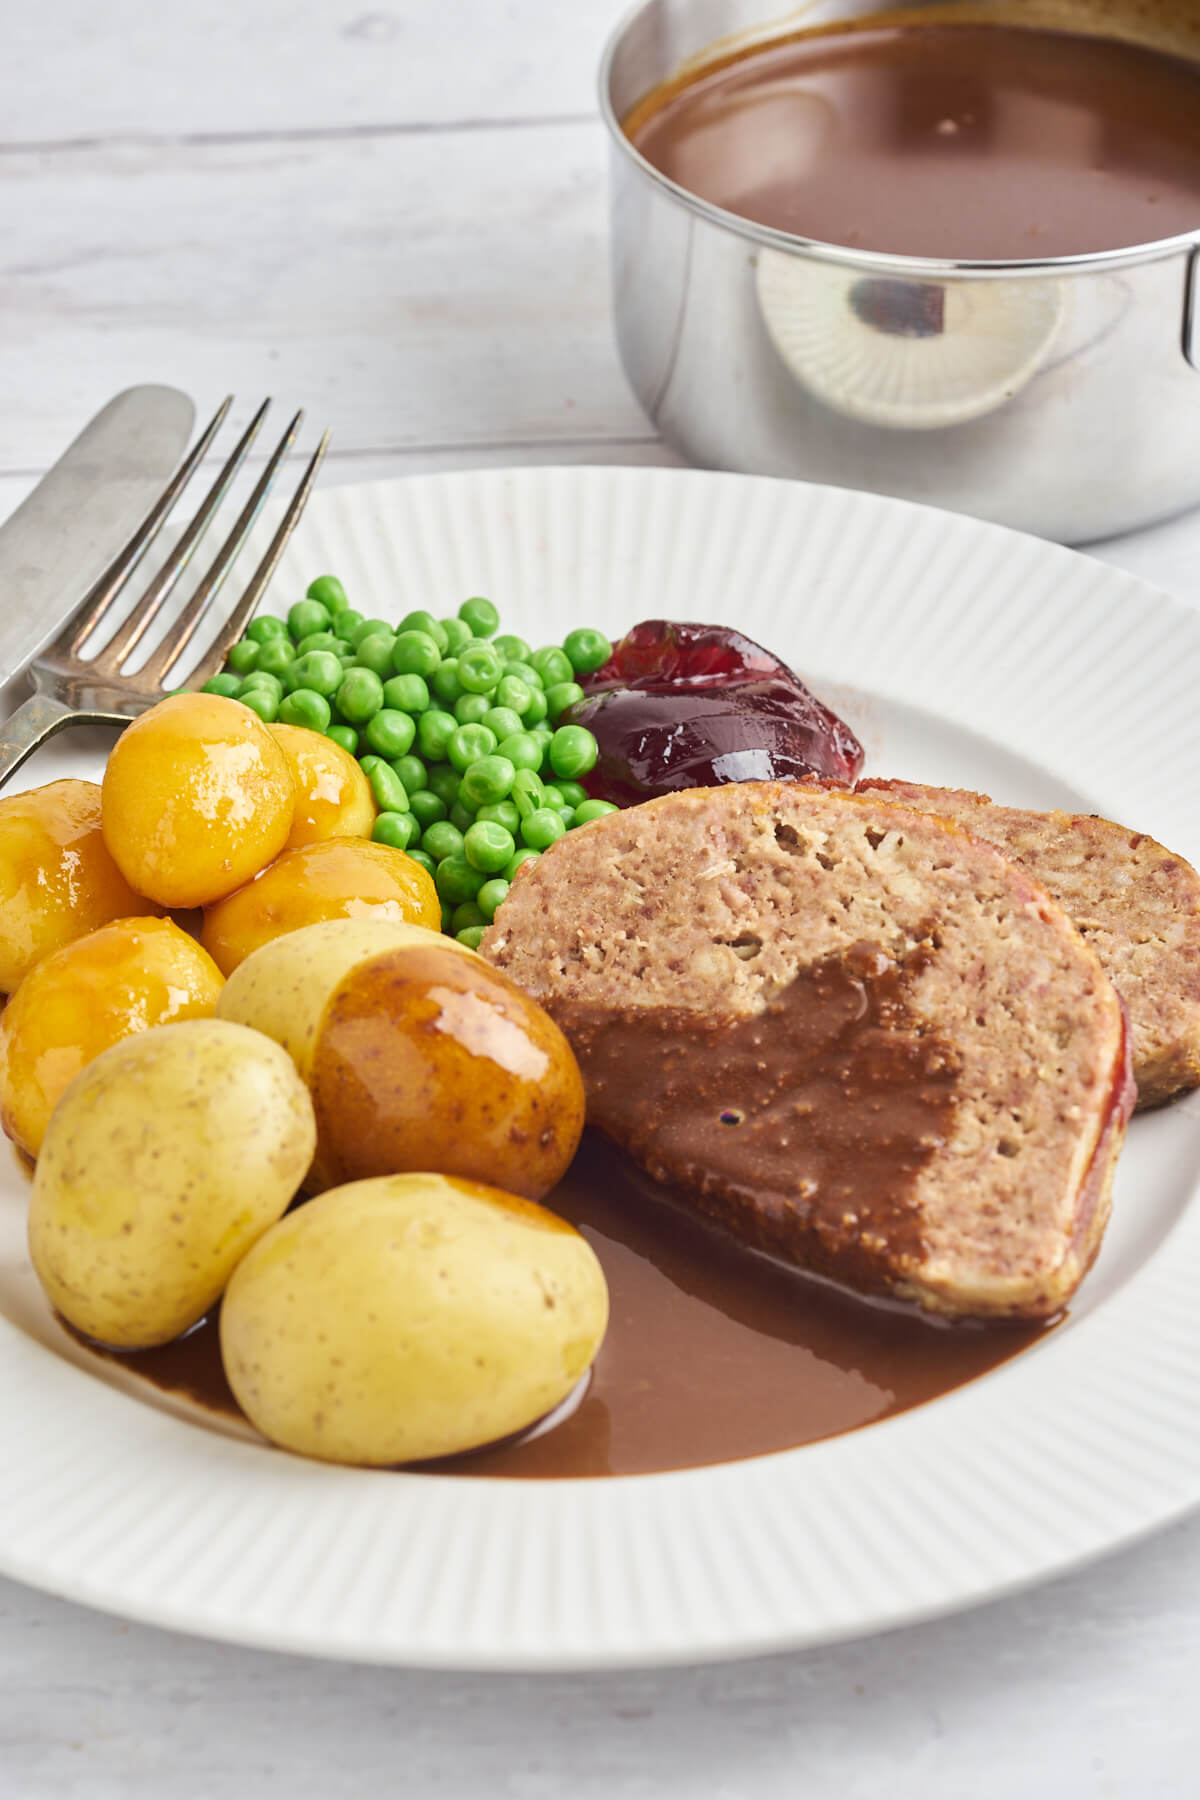 Danish meatloaf with gravy and potatoes on plate